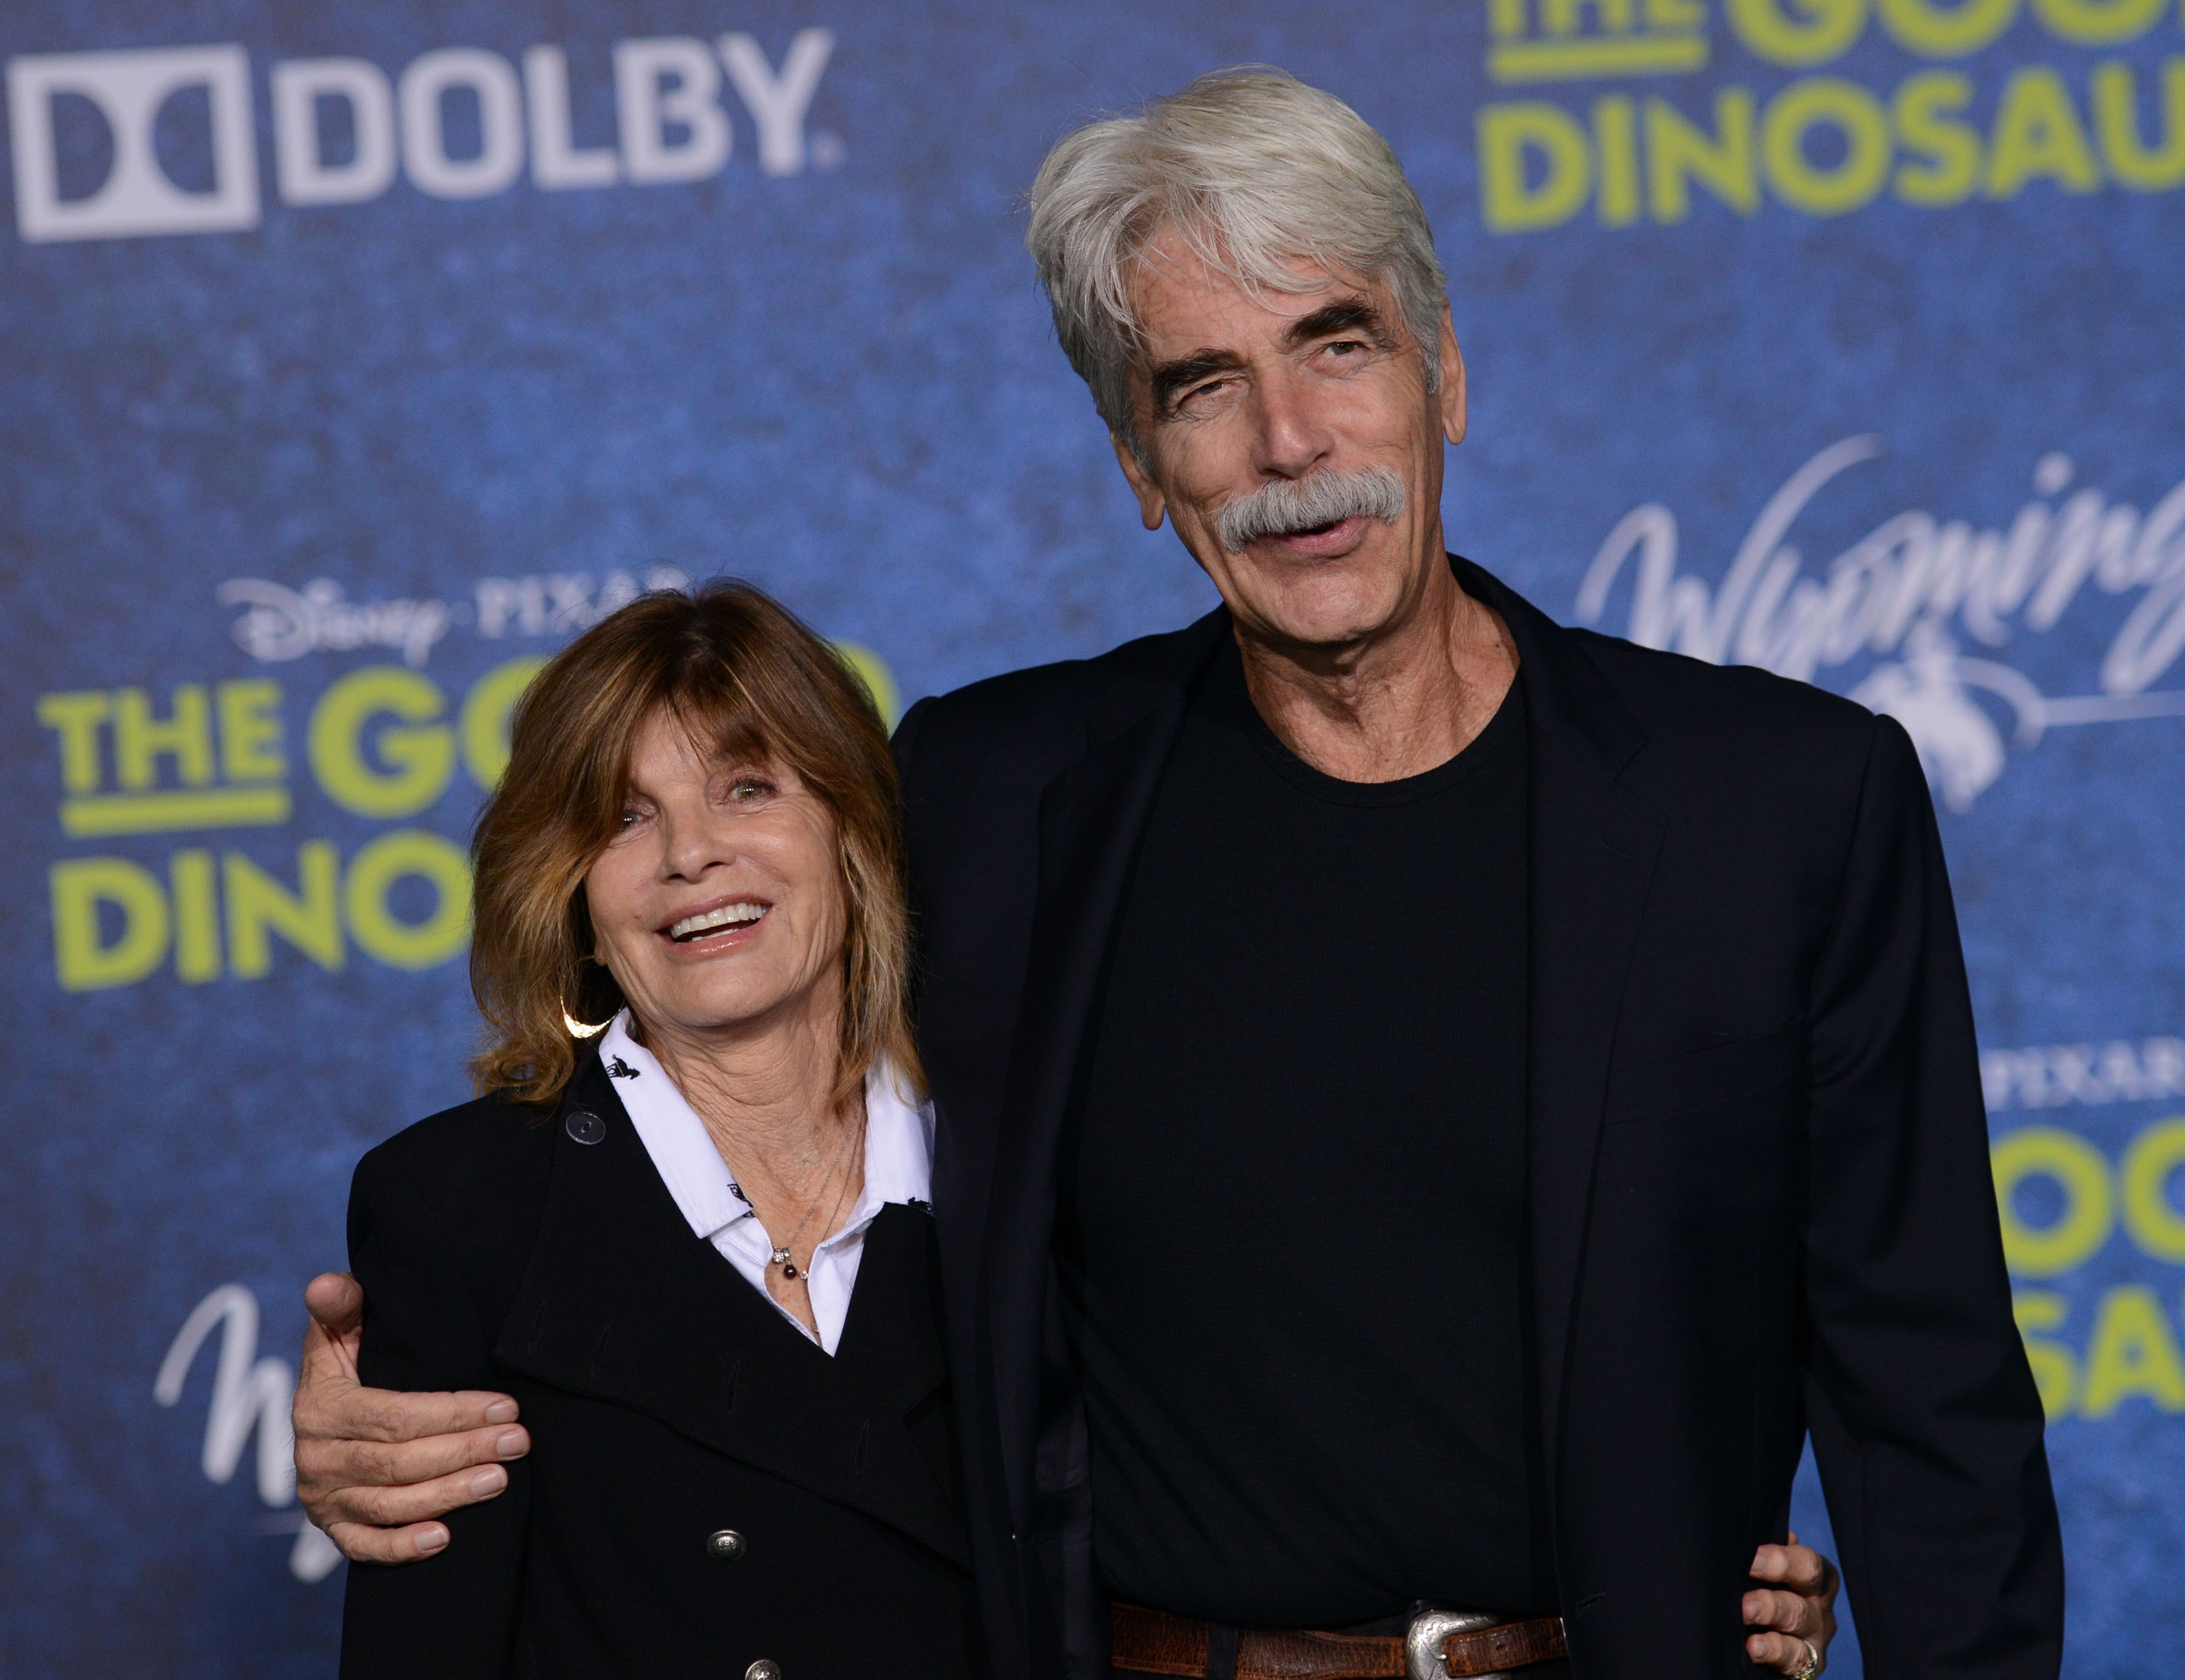 Sam Elliott and his wife Katherine Ross at the premiere of "The Good Dinosaur" in, California in 2015 | Source: Getty Images